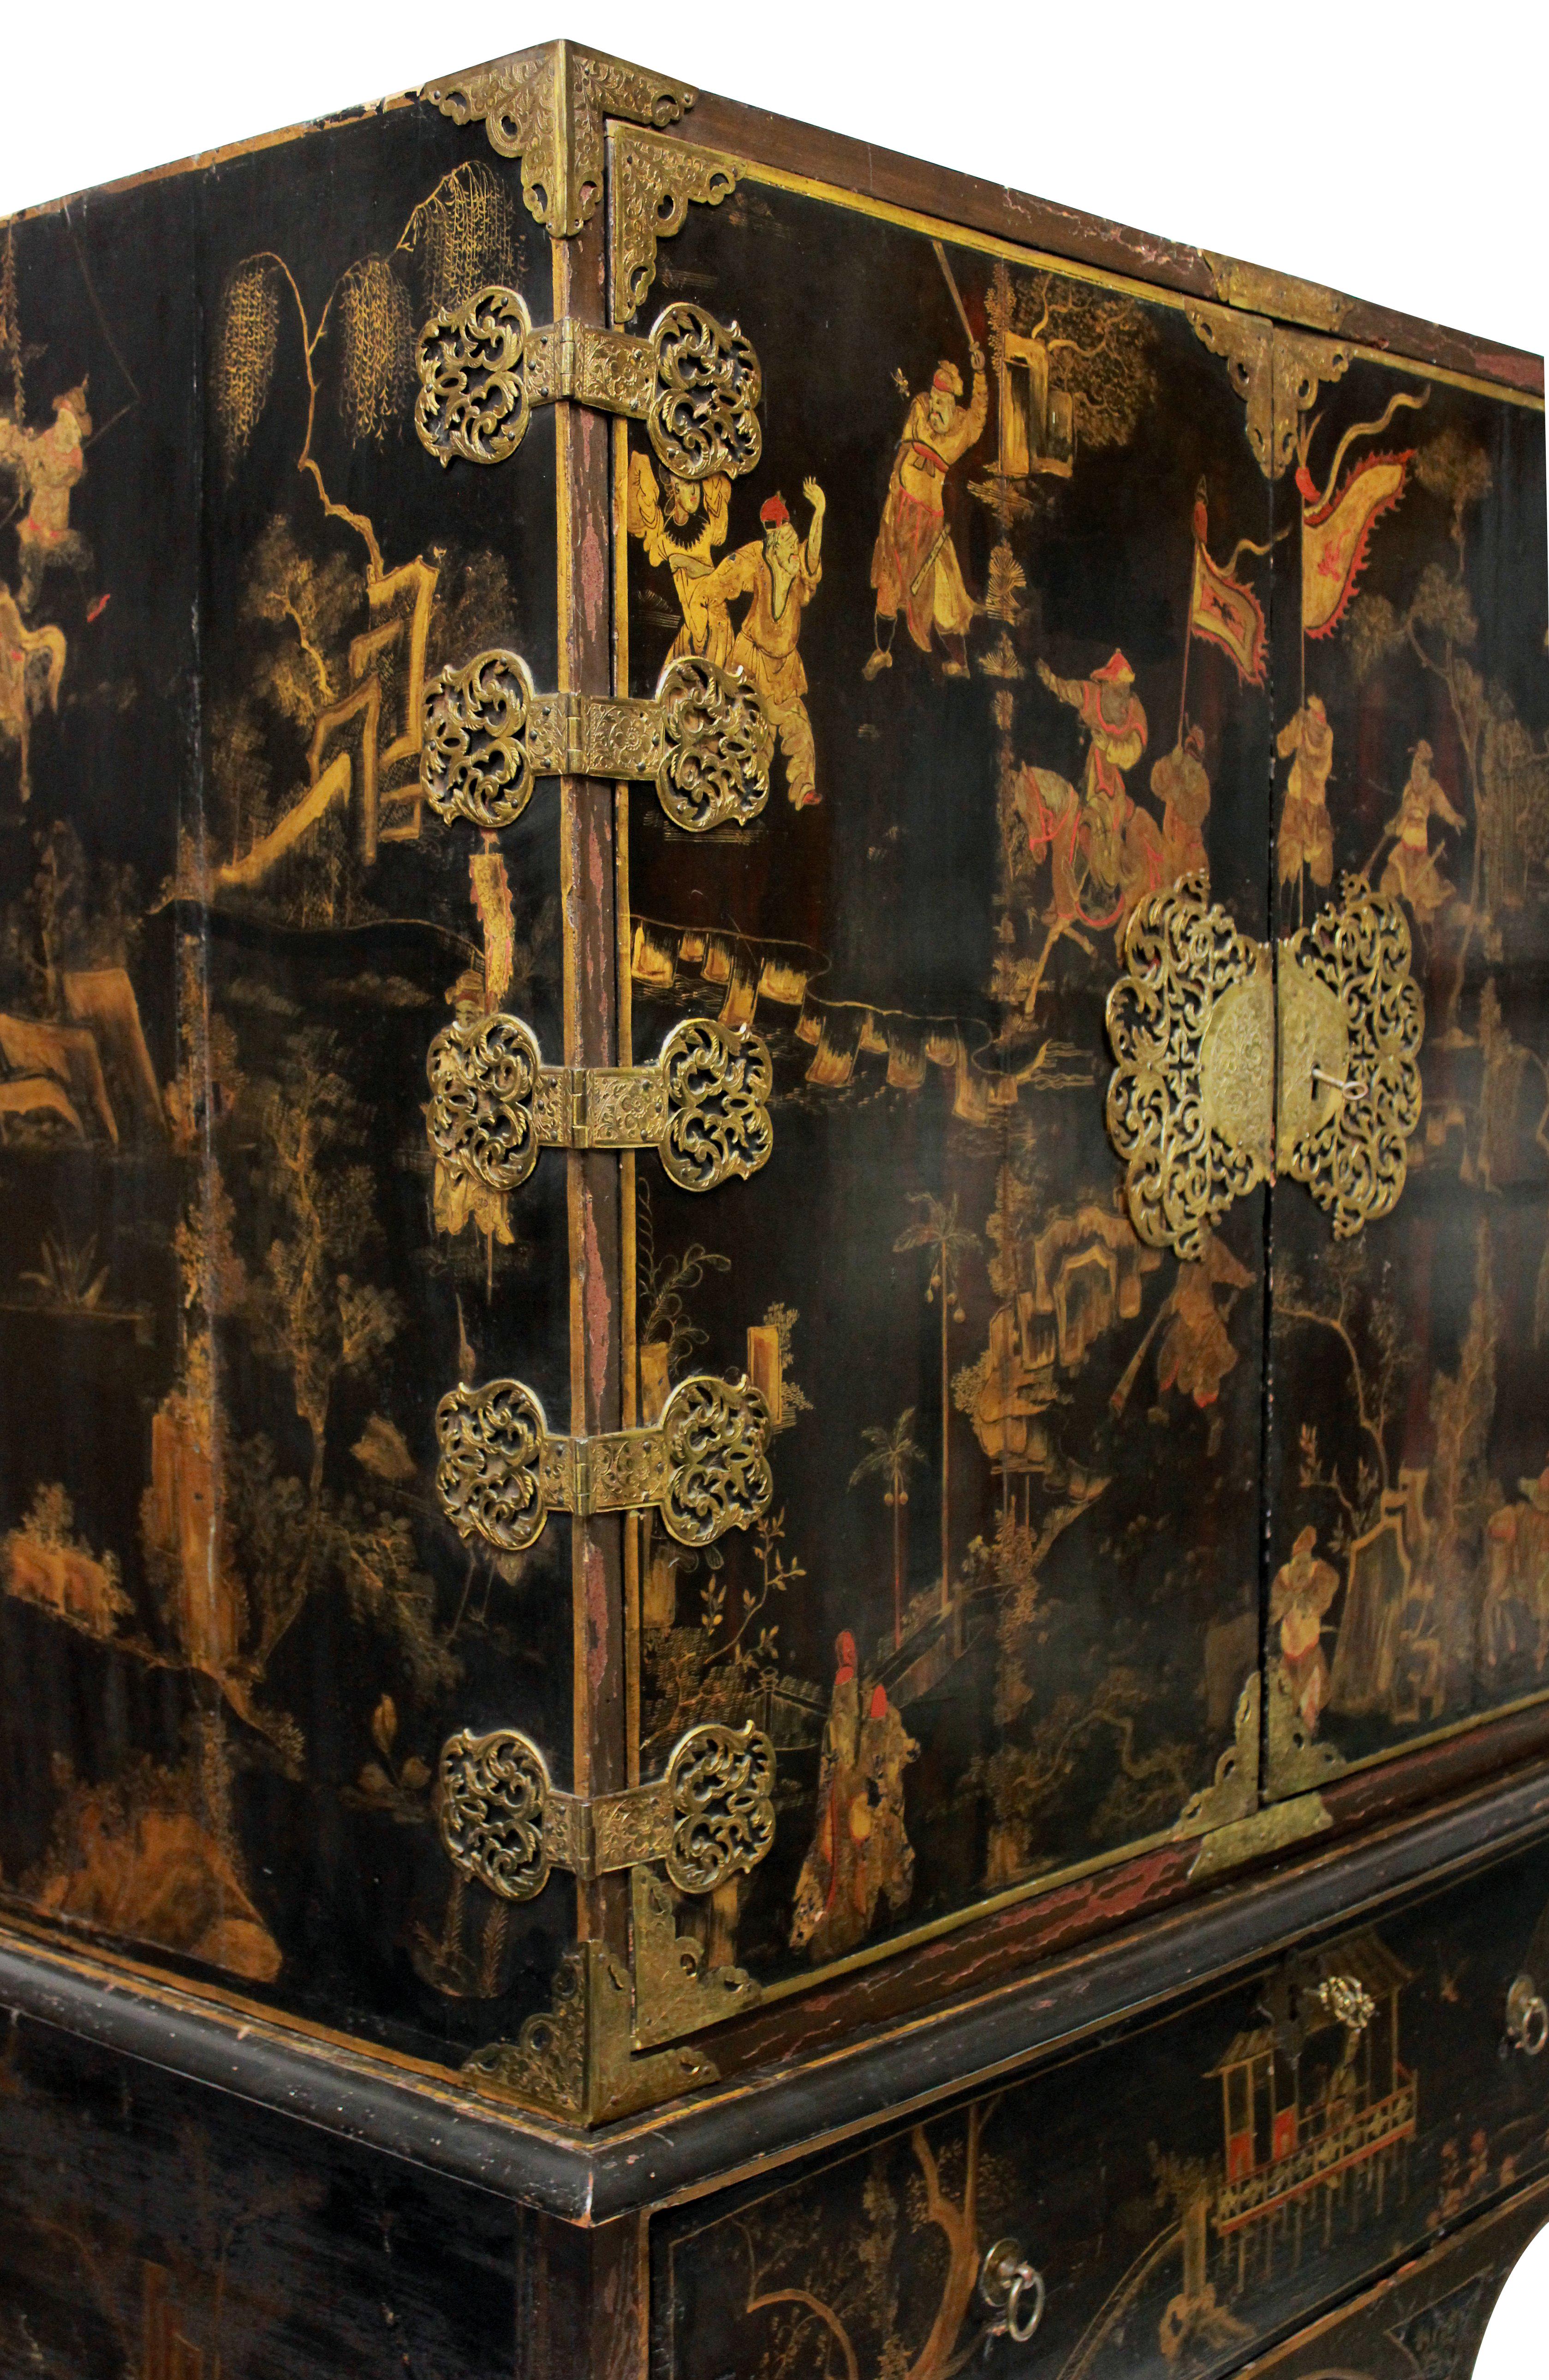 Japanese Period William & Mary Black and Gilt Japanned Cabinet on Stand